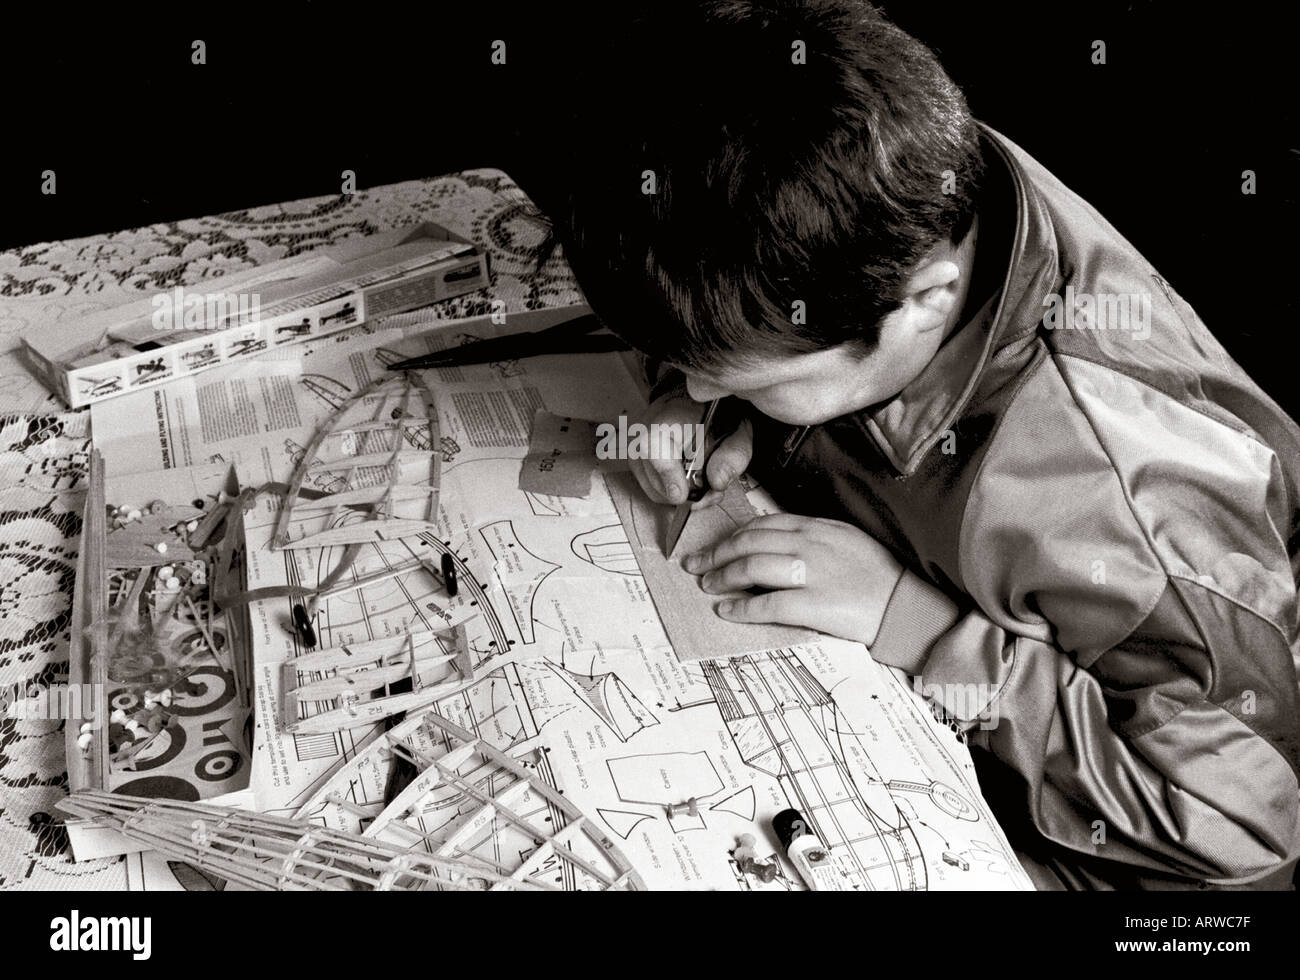 Boy working on flying model aircraft kit Stock Photo